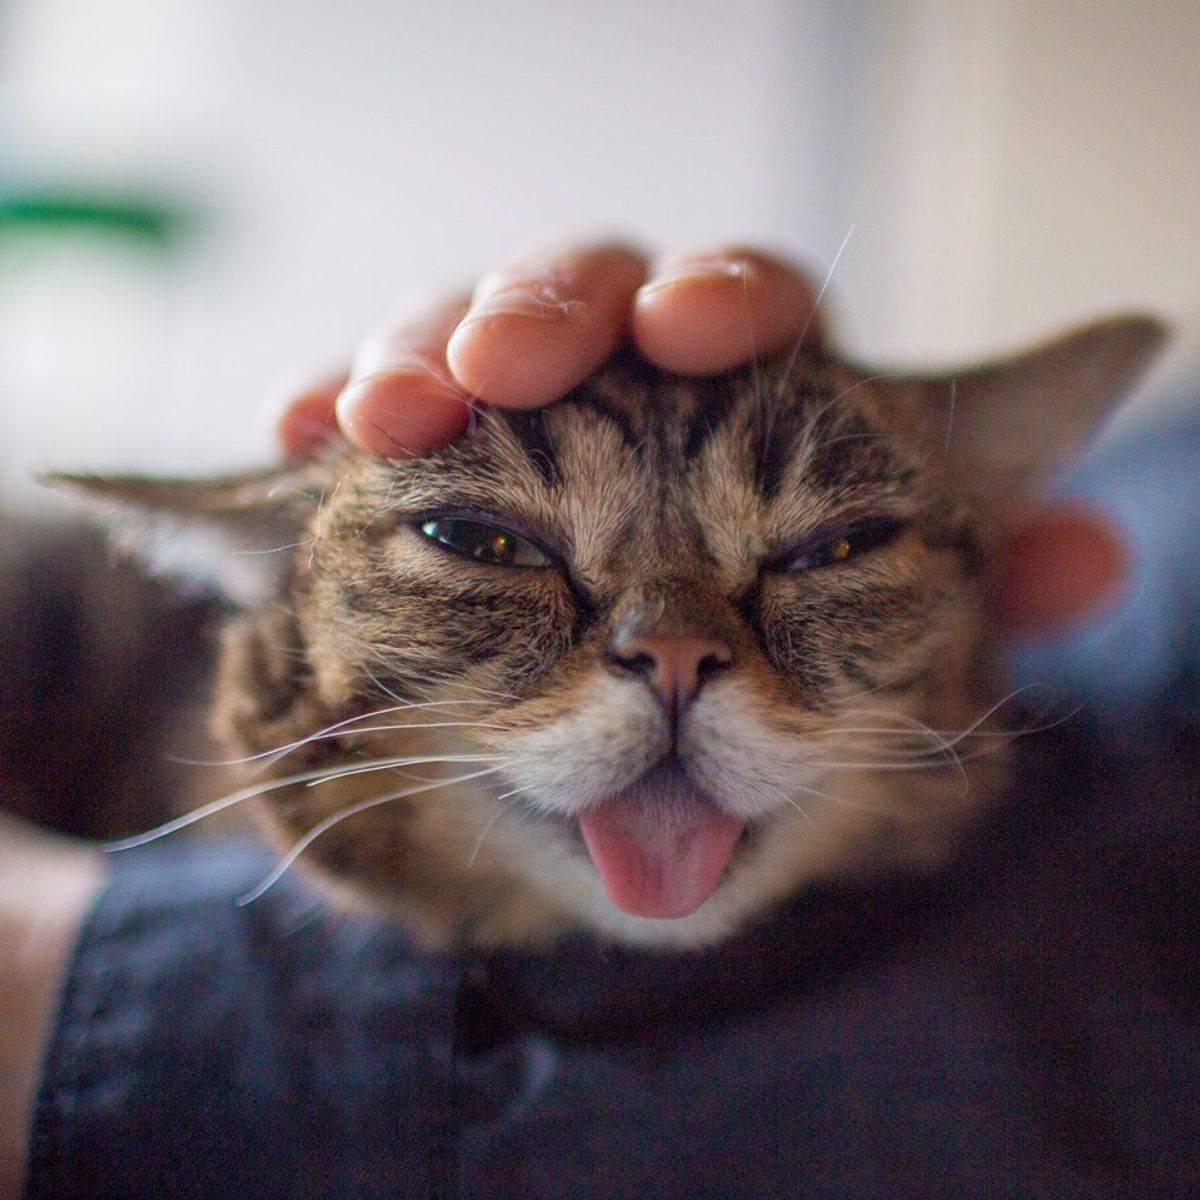 Bub: The Silly Cat That Can Make Anyone's Day